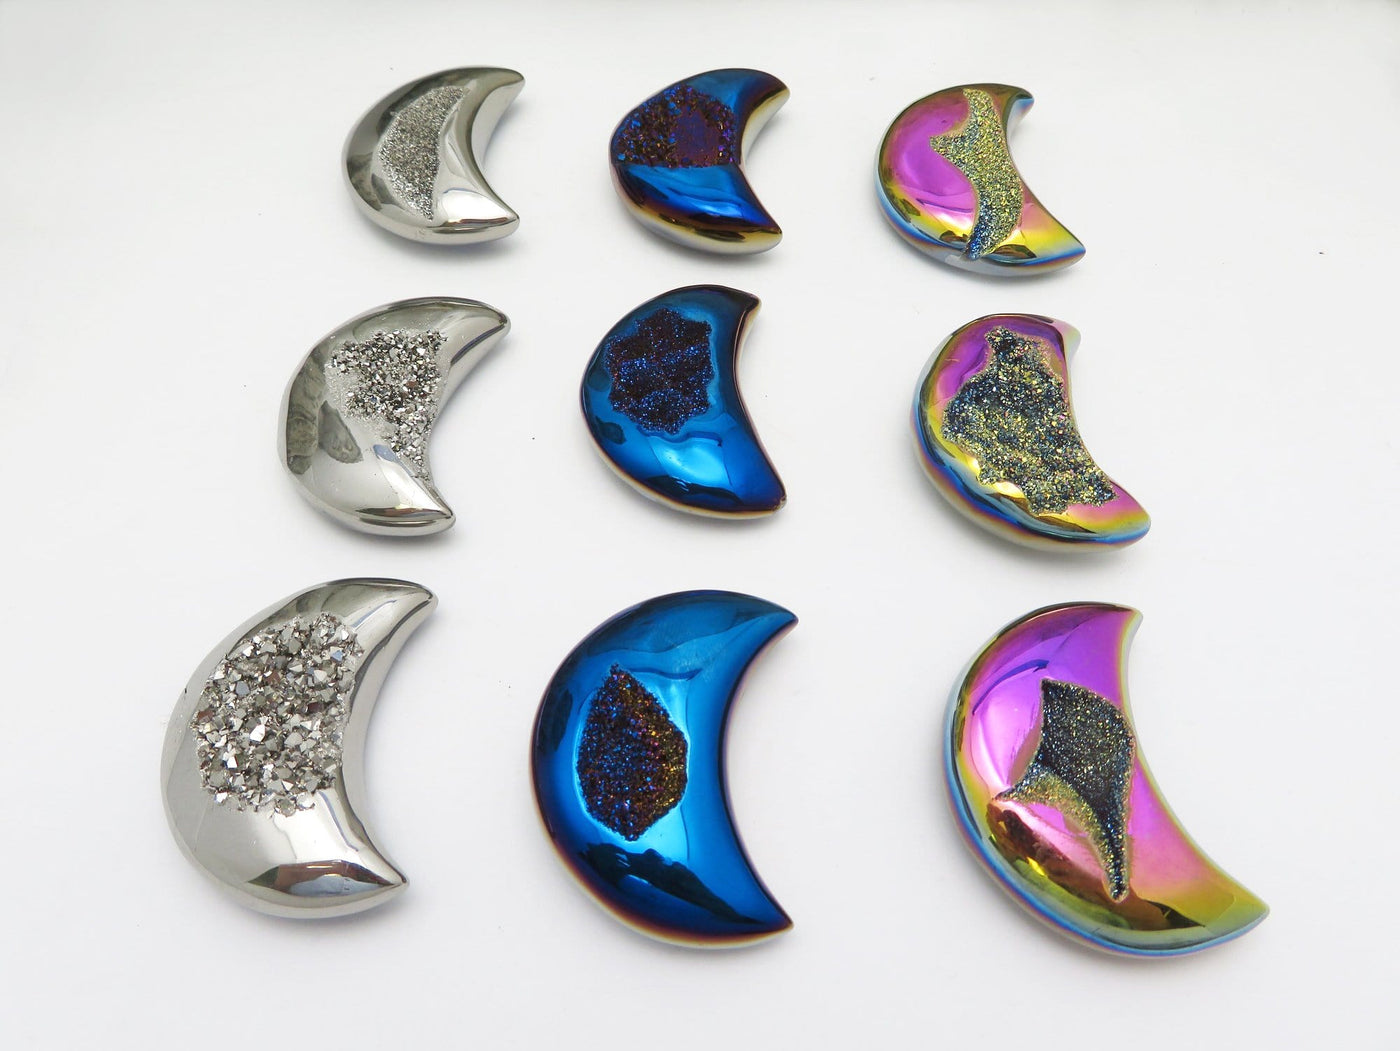 9 Titanium Druzy Moons in different colors on white background